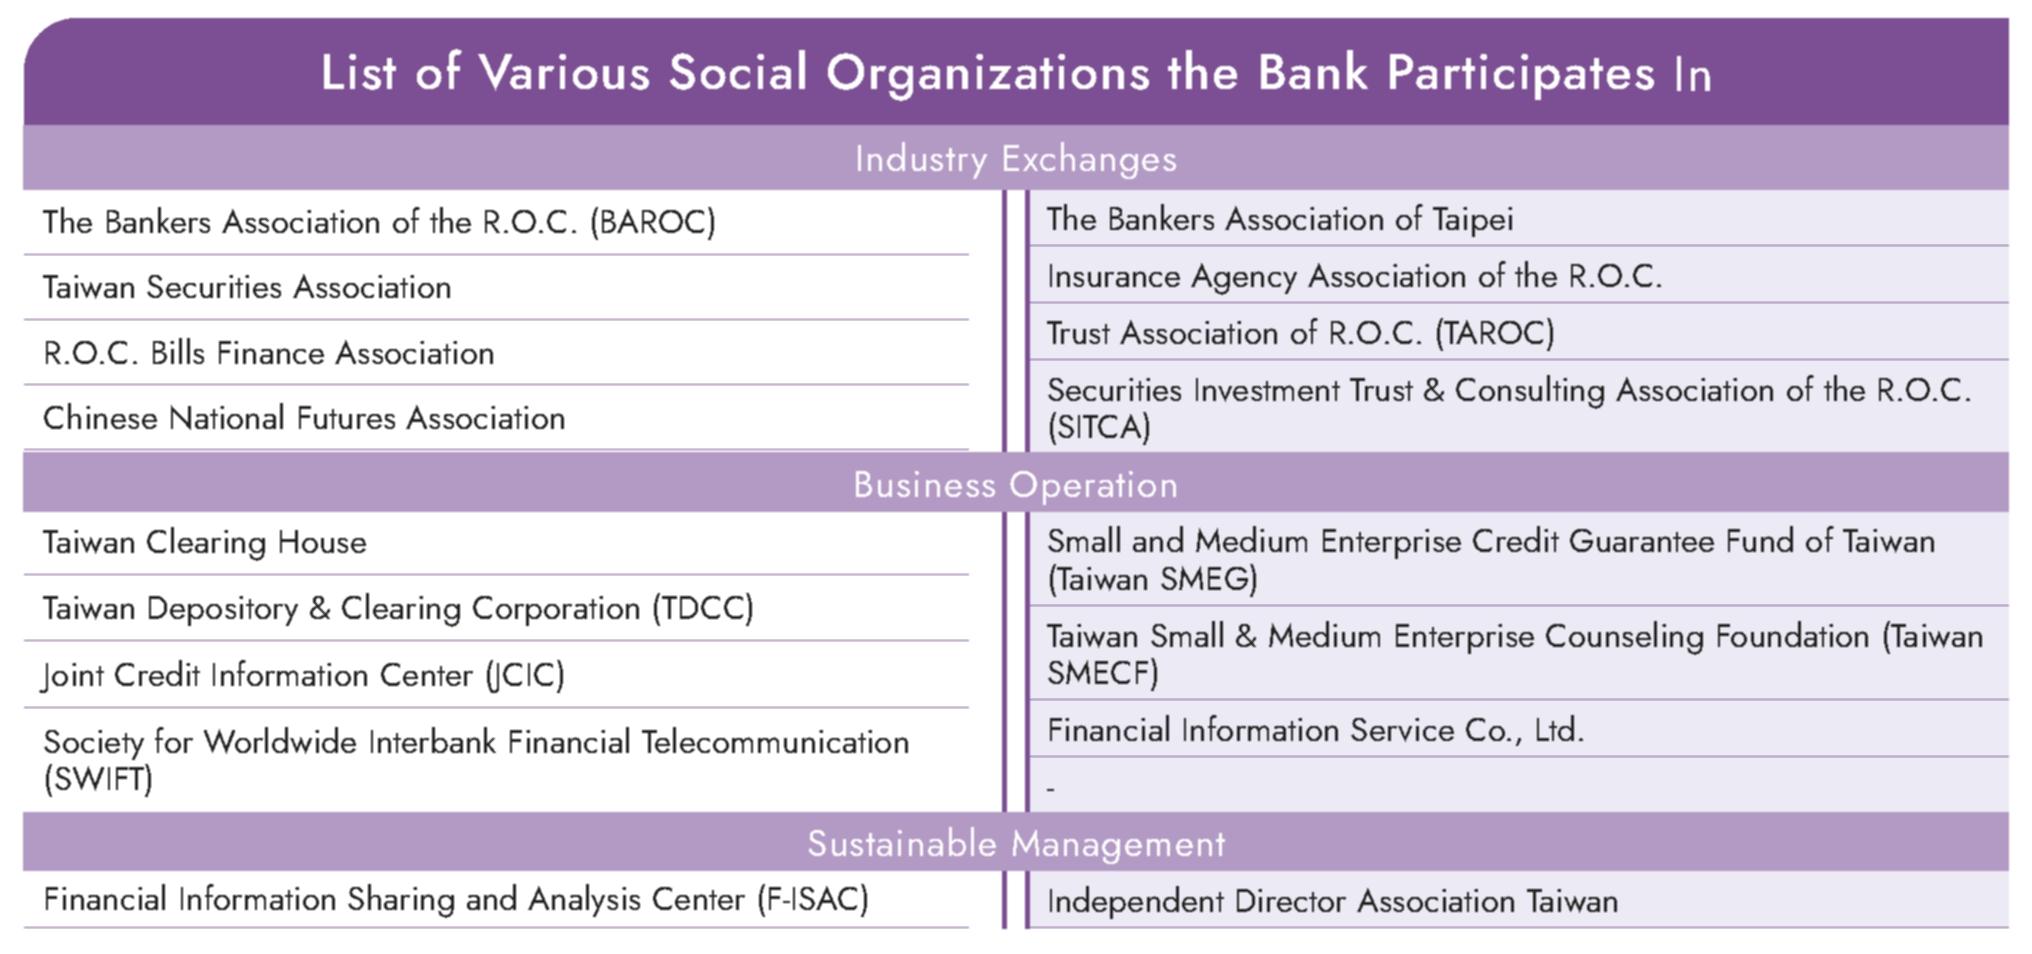 List of Various Social Organizations the Bank Participates In